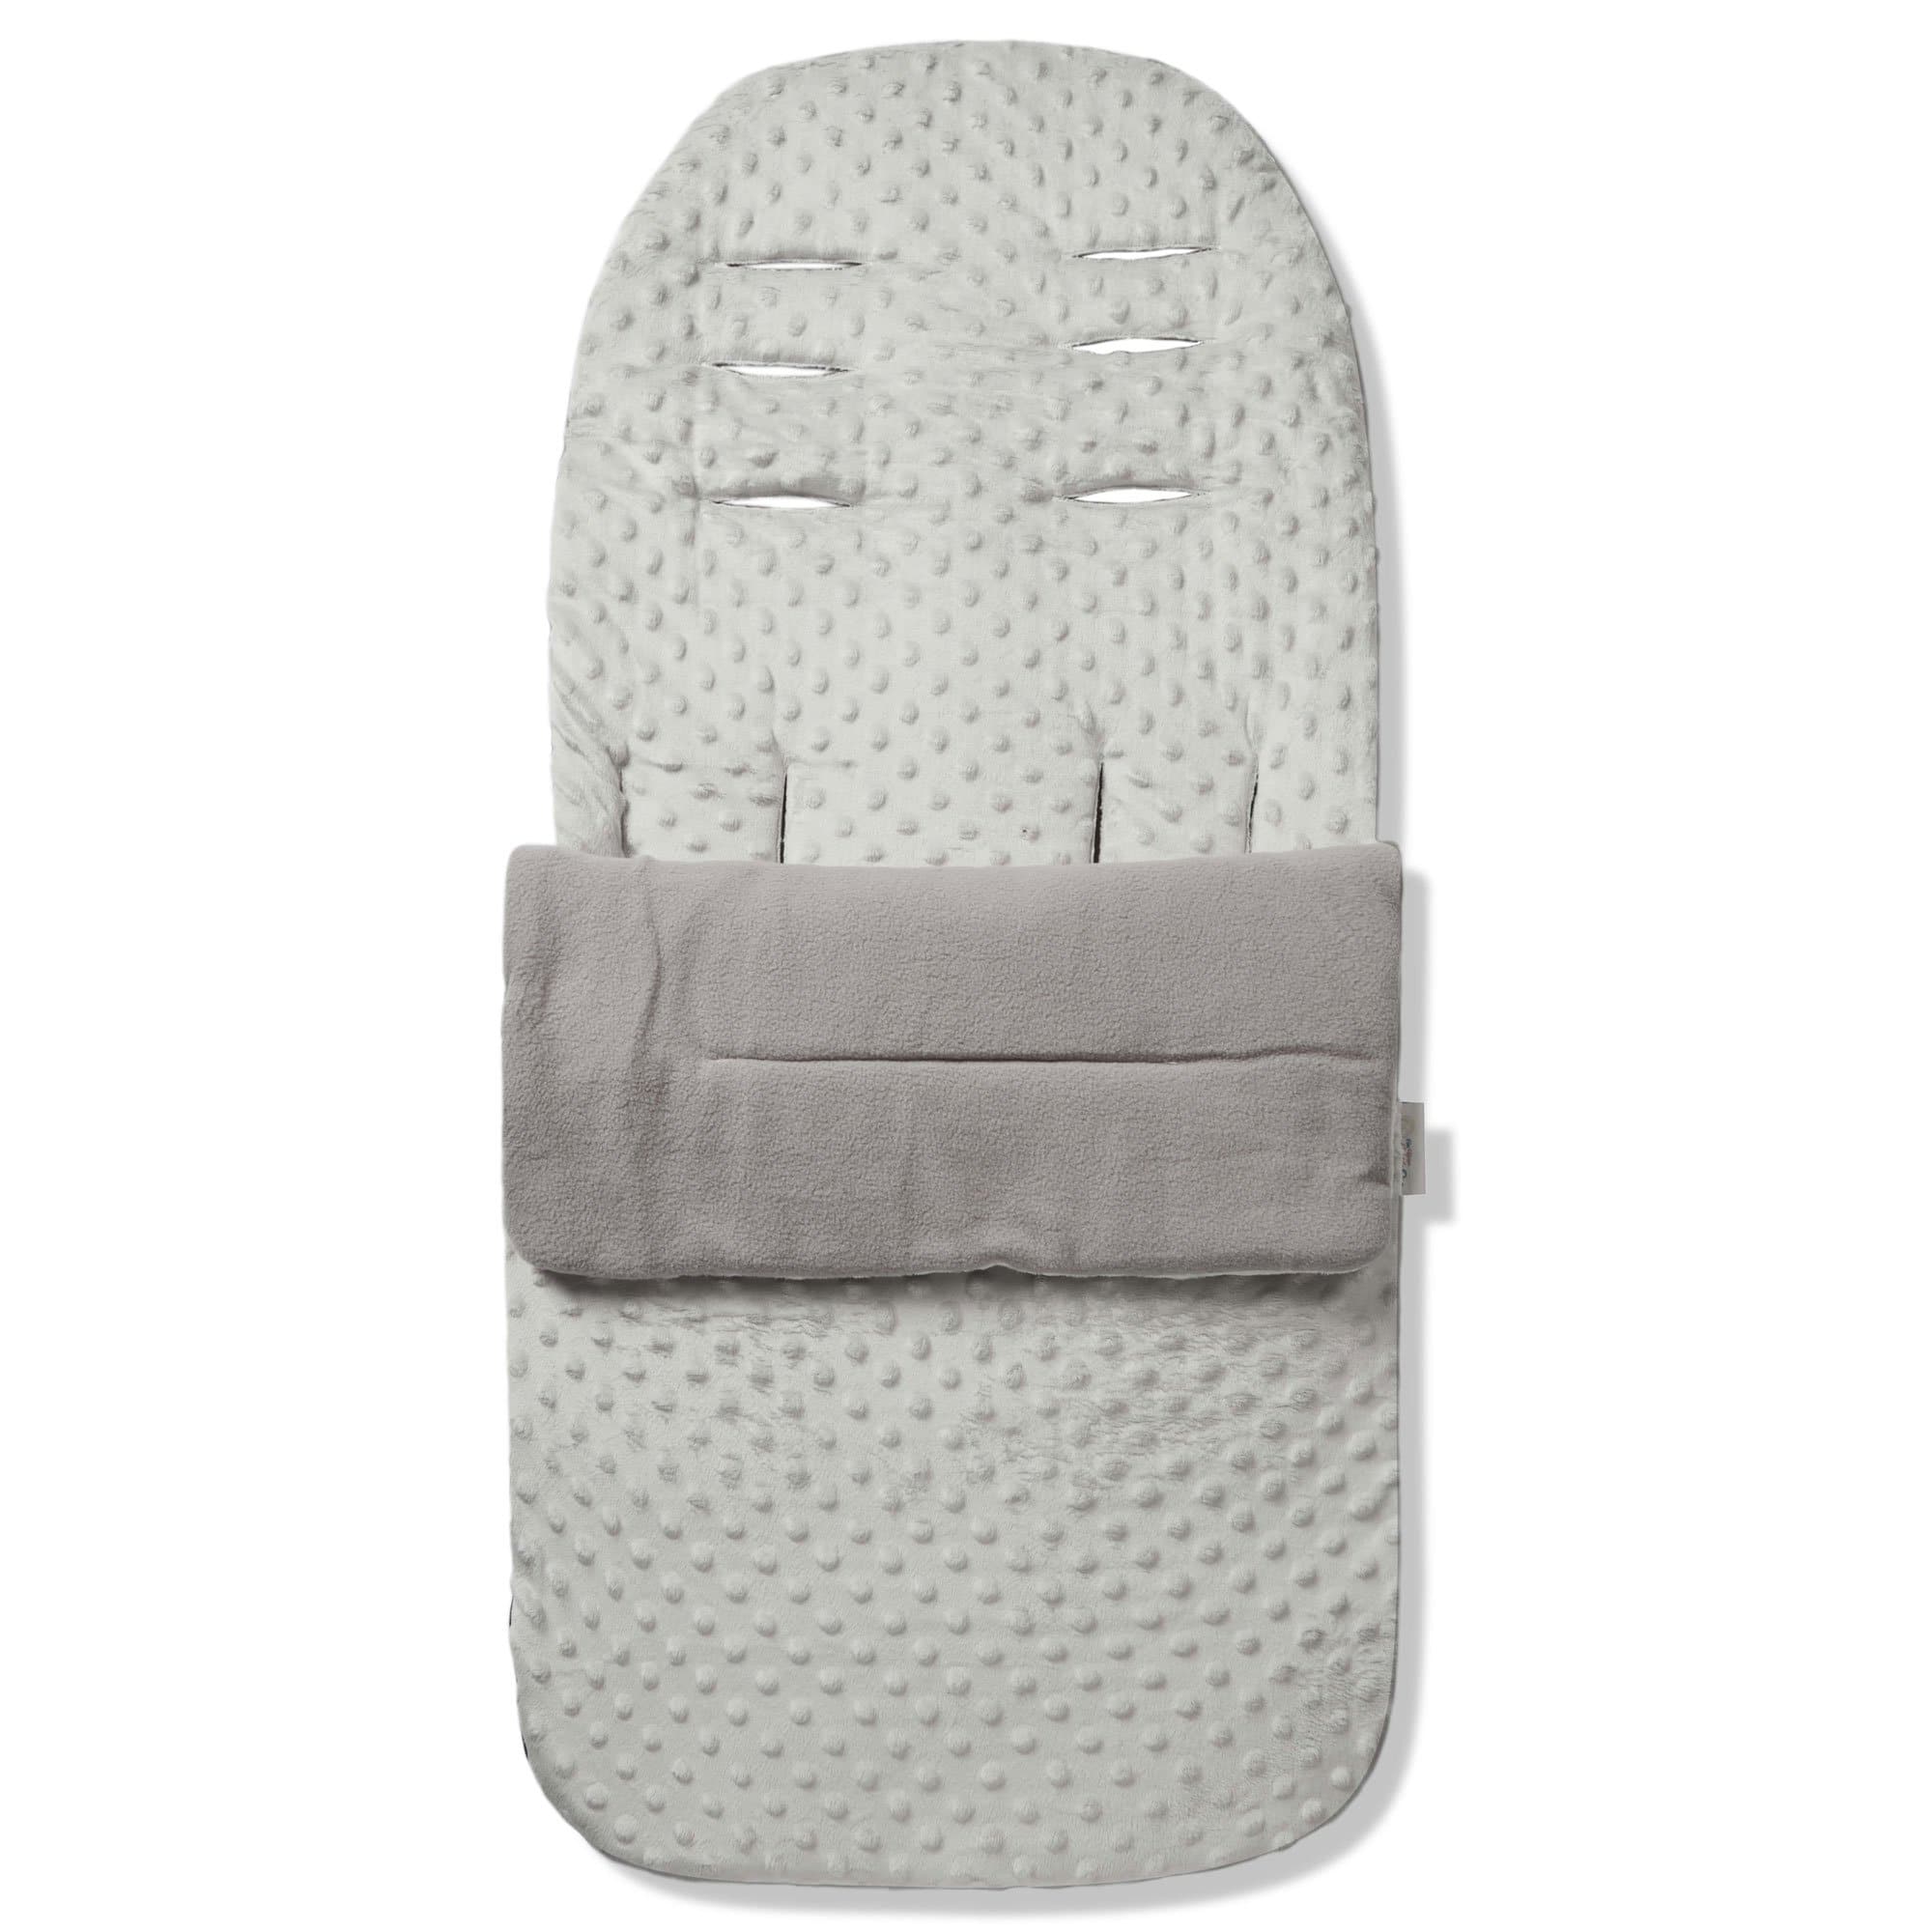 Dimple Footmuff / Cosy Toes Compatible with Noukies - Grey / Fits All Models | For Your Little One